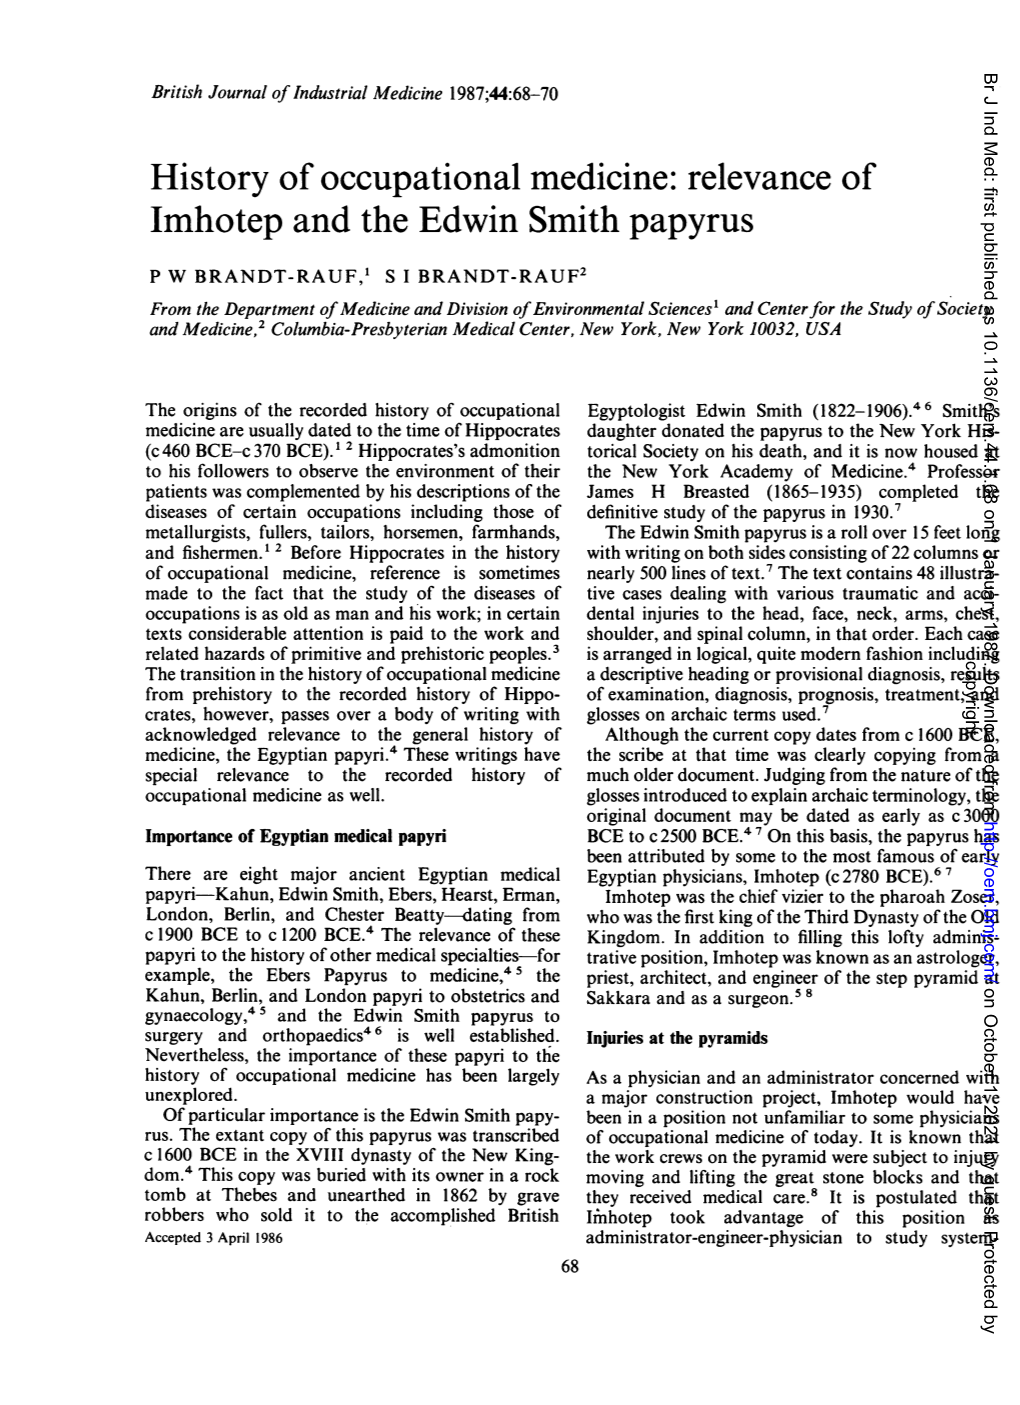 Relevance of Imhotep and the Edwin Smith Papyrus